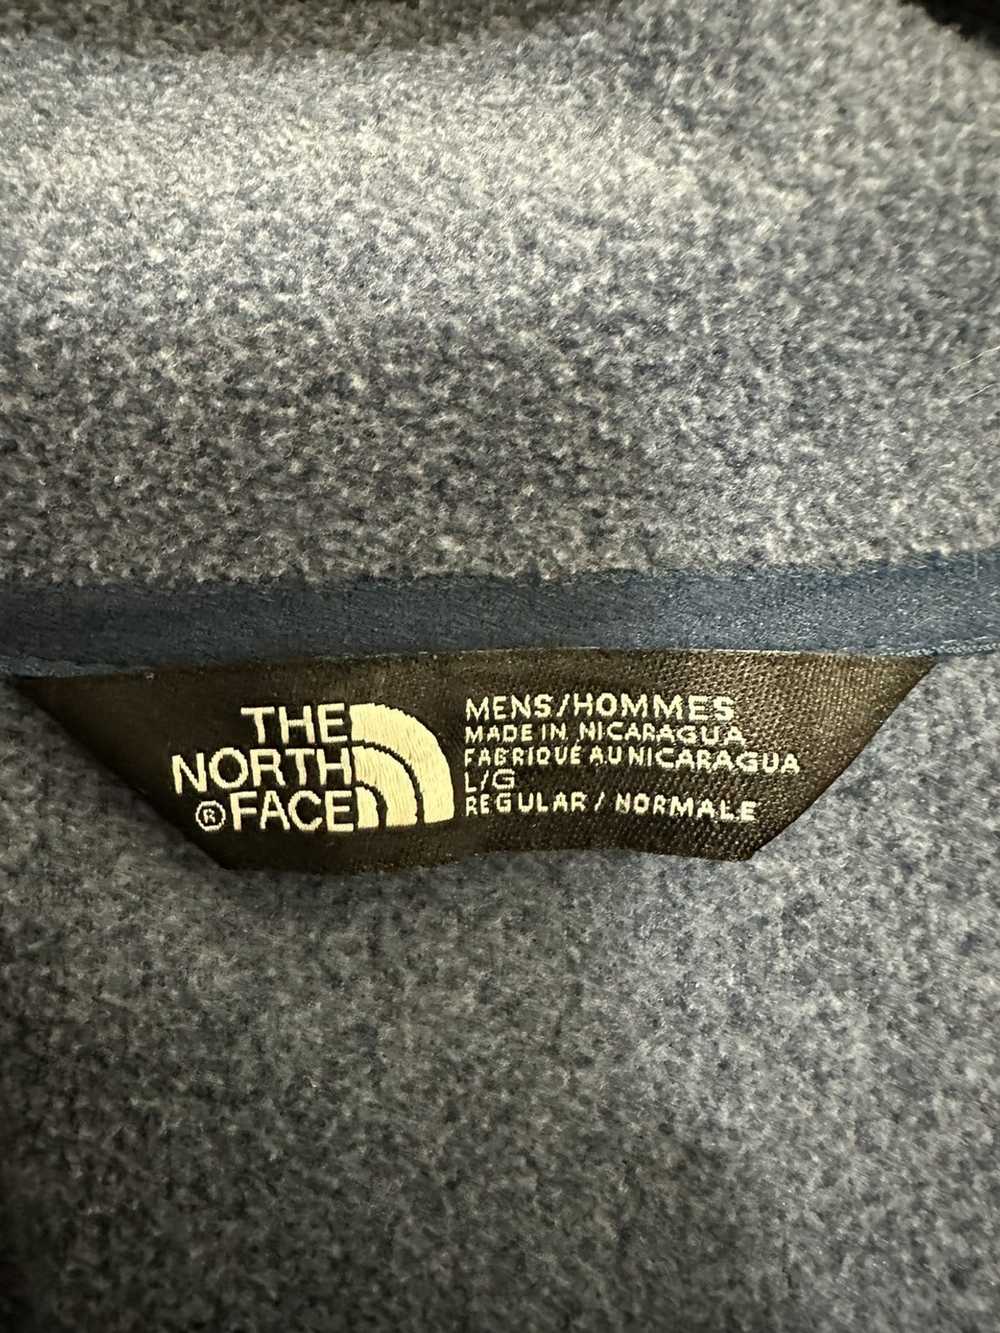 The North Face Fleece Jacket - image 2